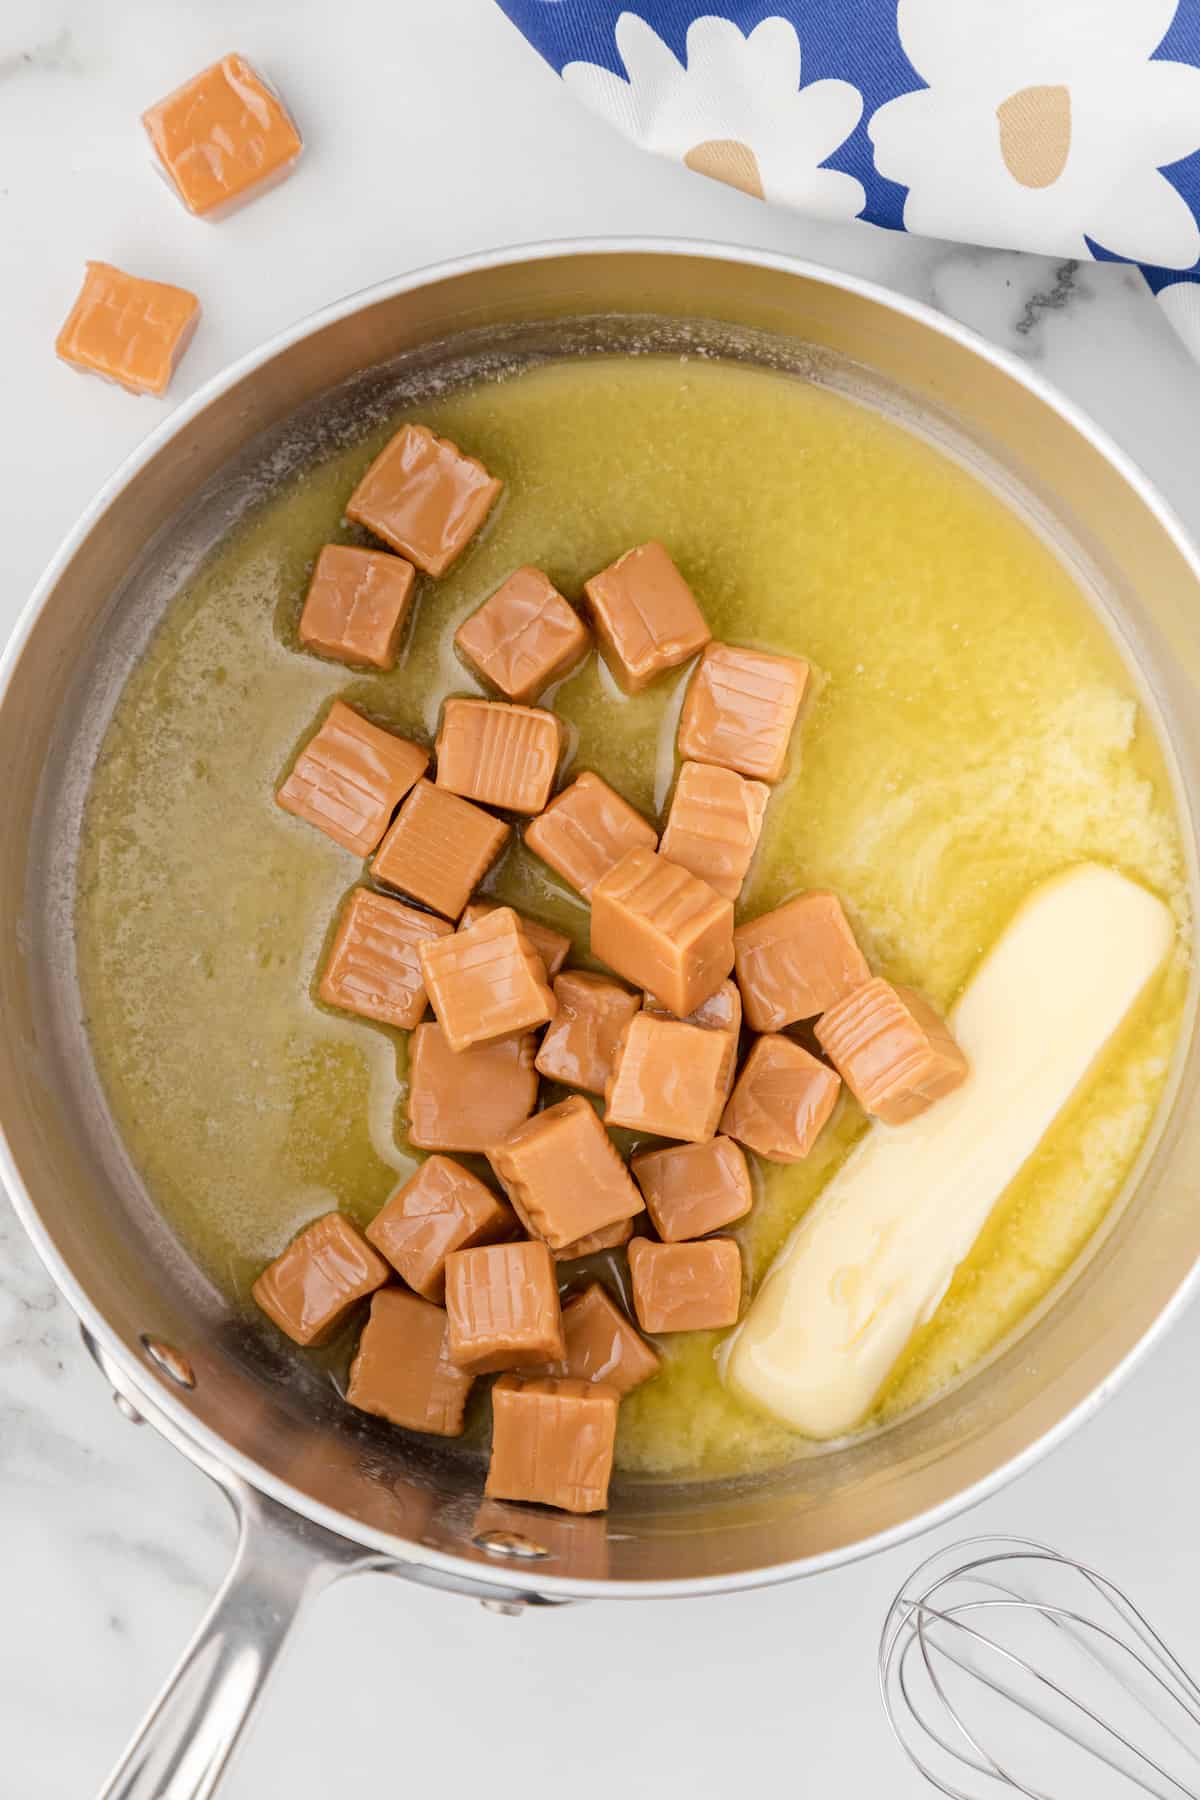 Melt the butter and caramels in a skillet